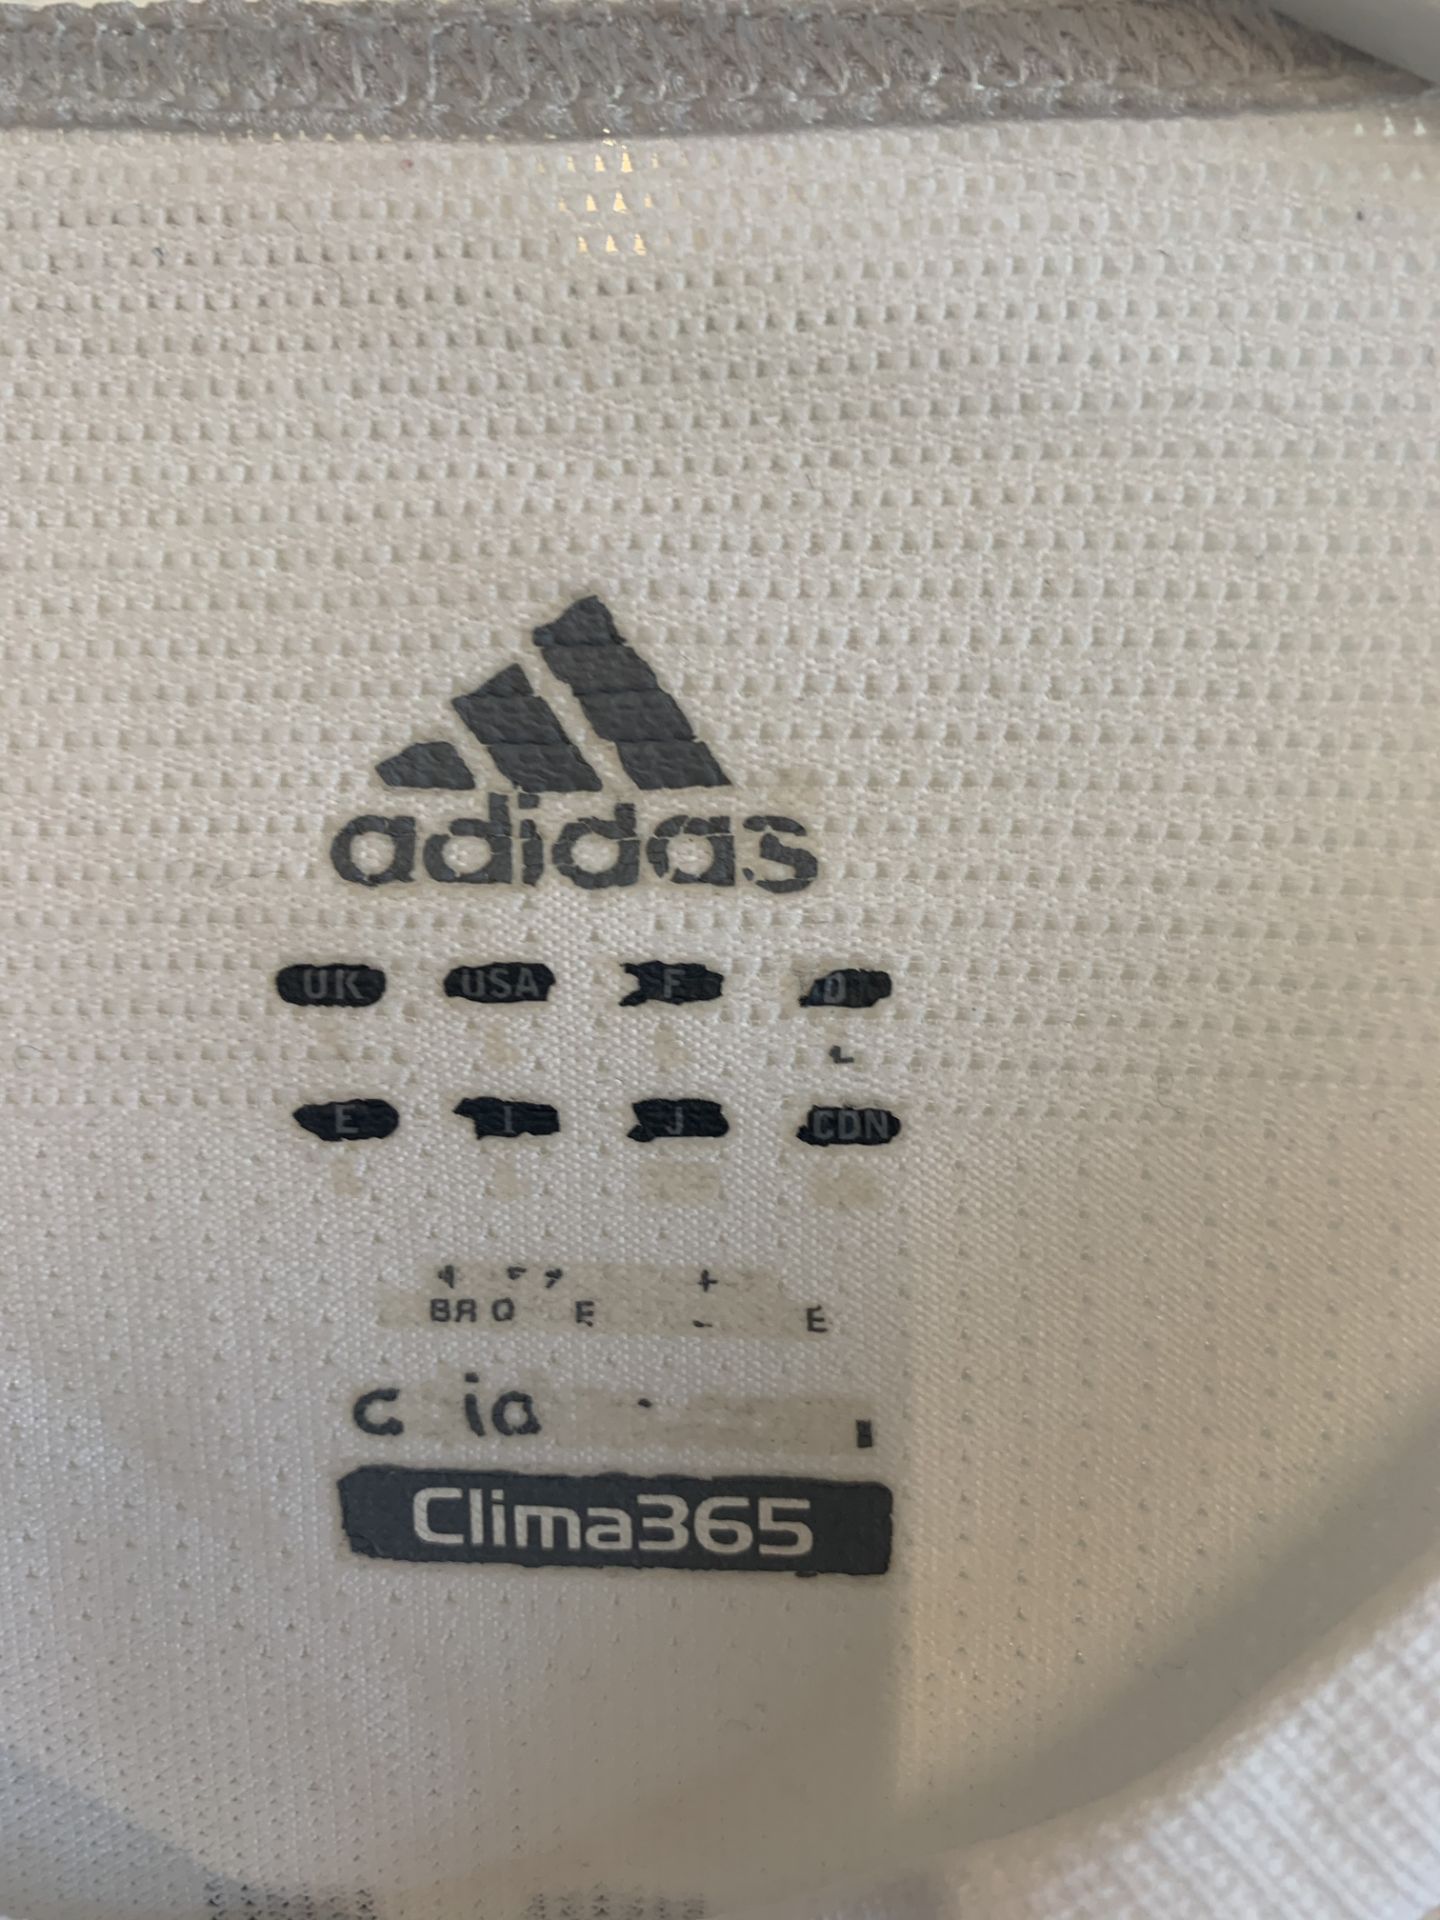 Adidas long sleeved sports top - Image 2 of 2